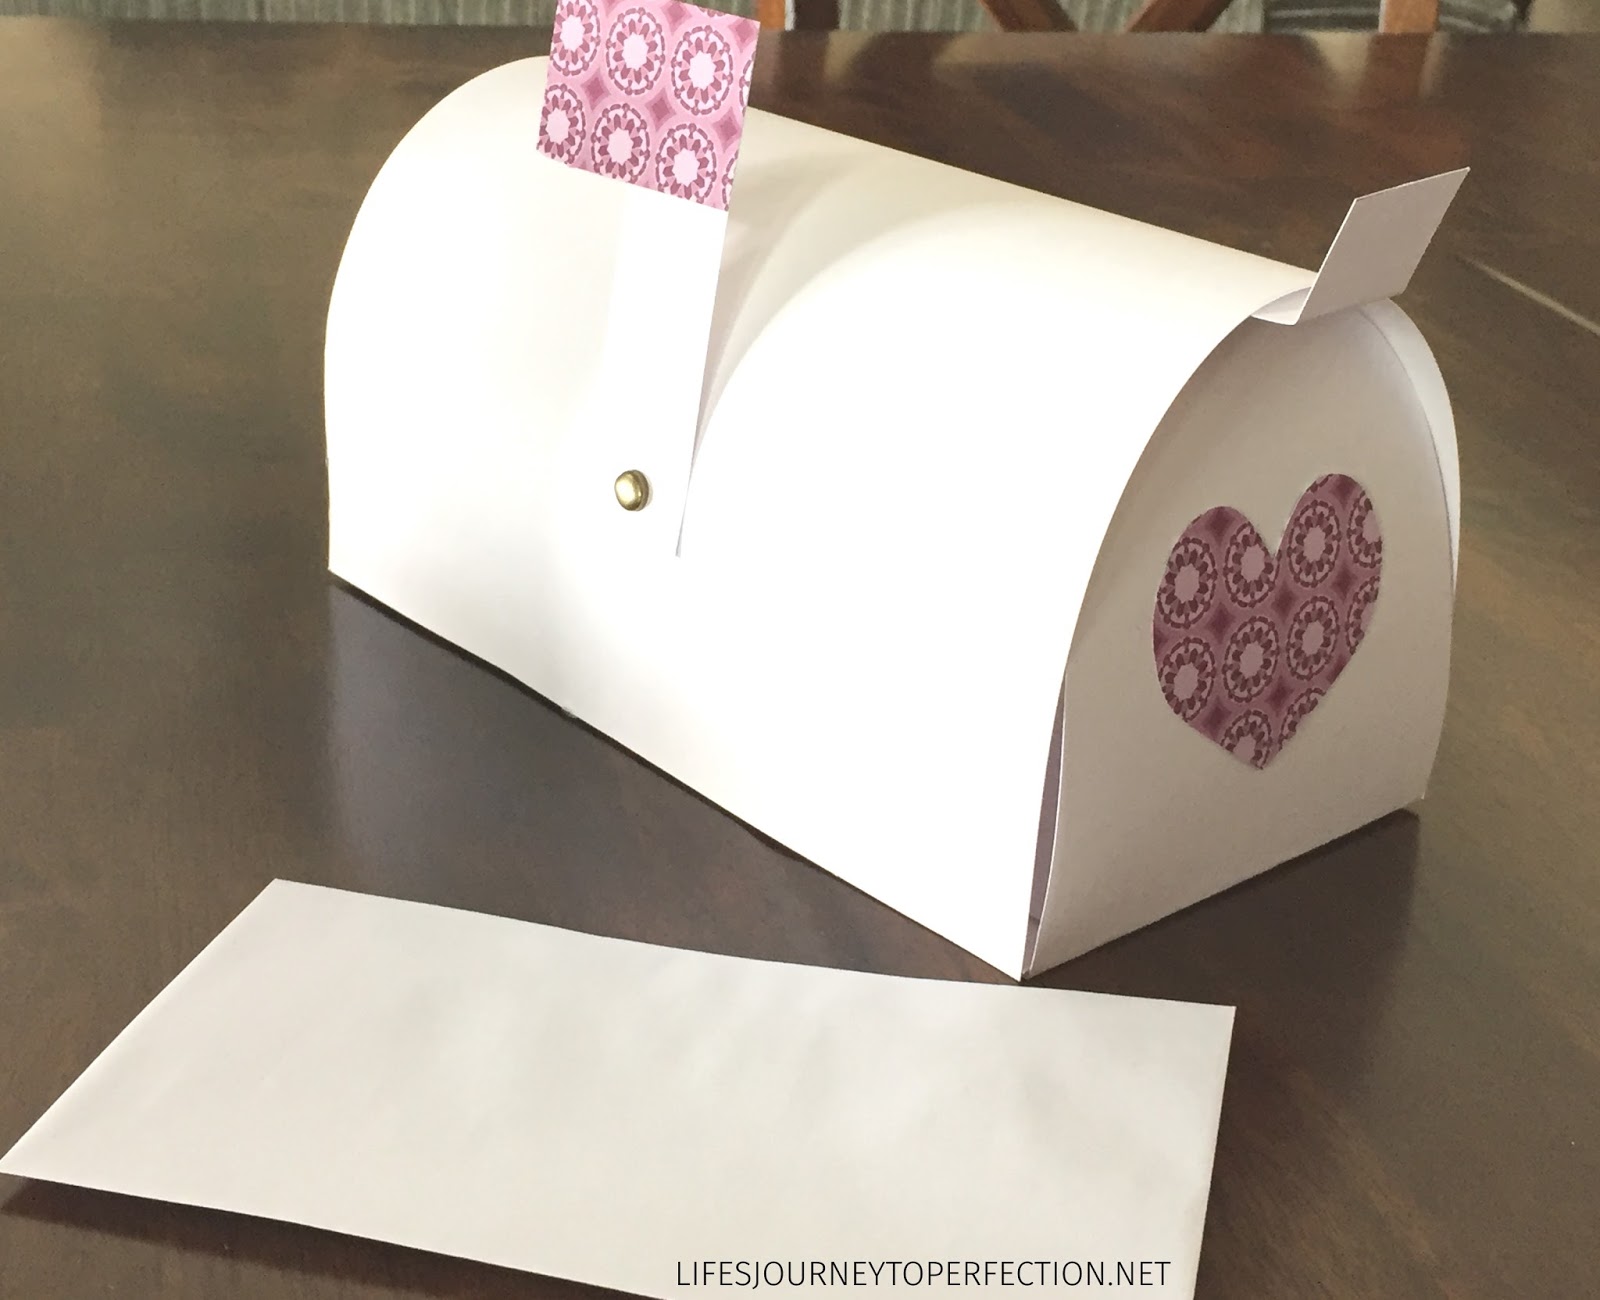 life-s-journey-to-perfection-how-to-make-a-paper-mailbox-out-of-2